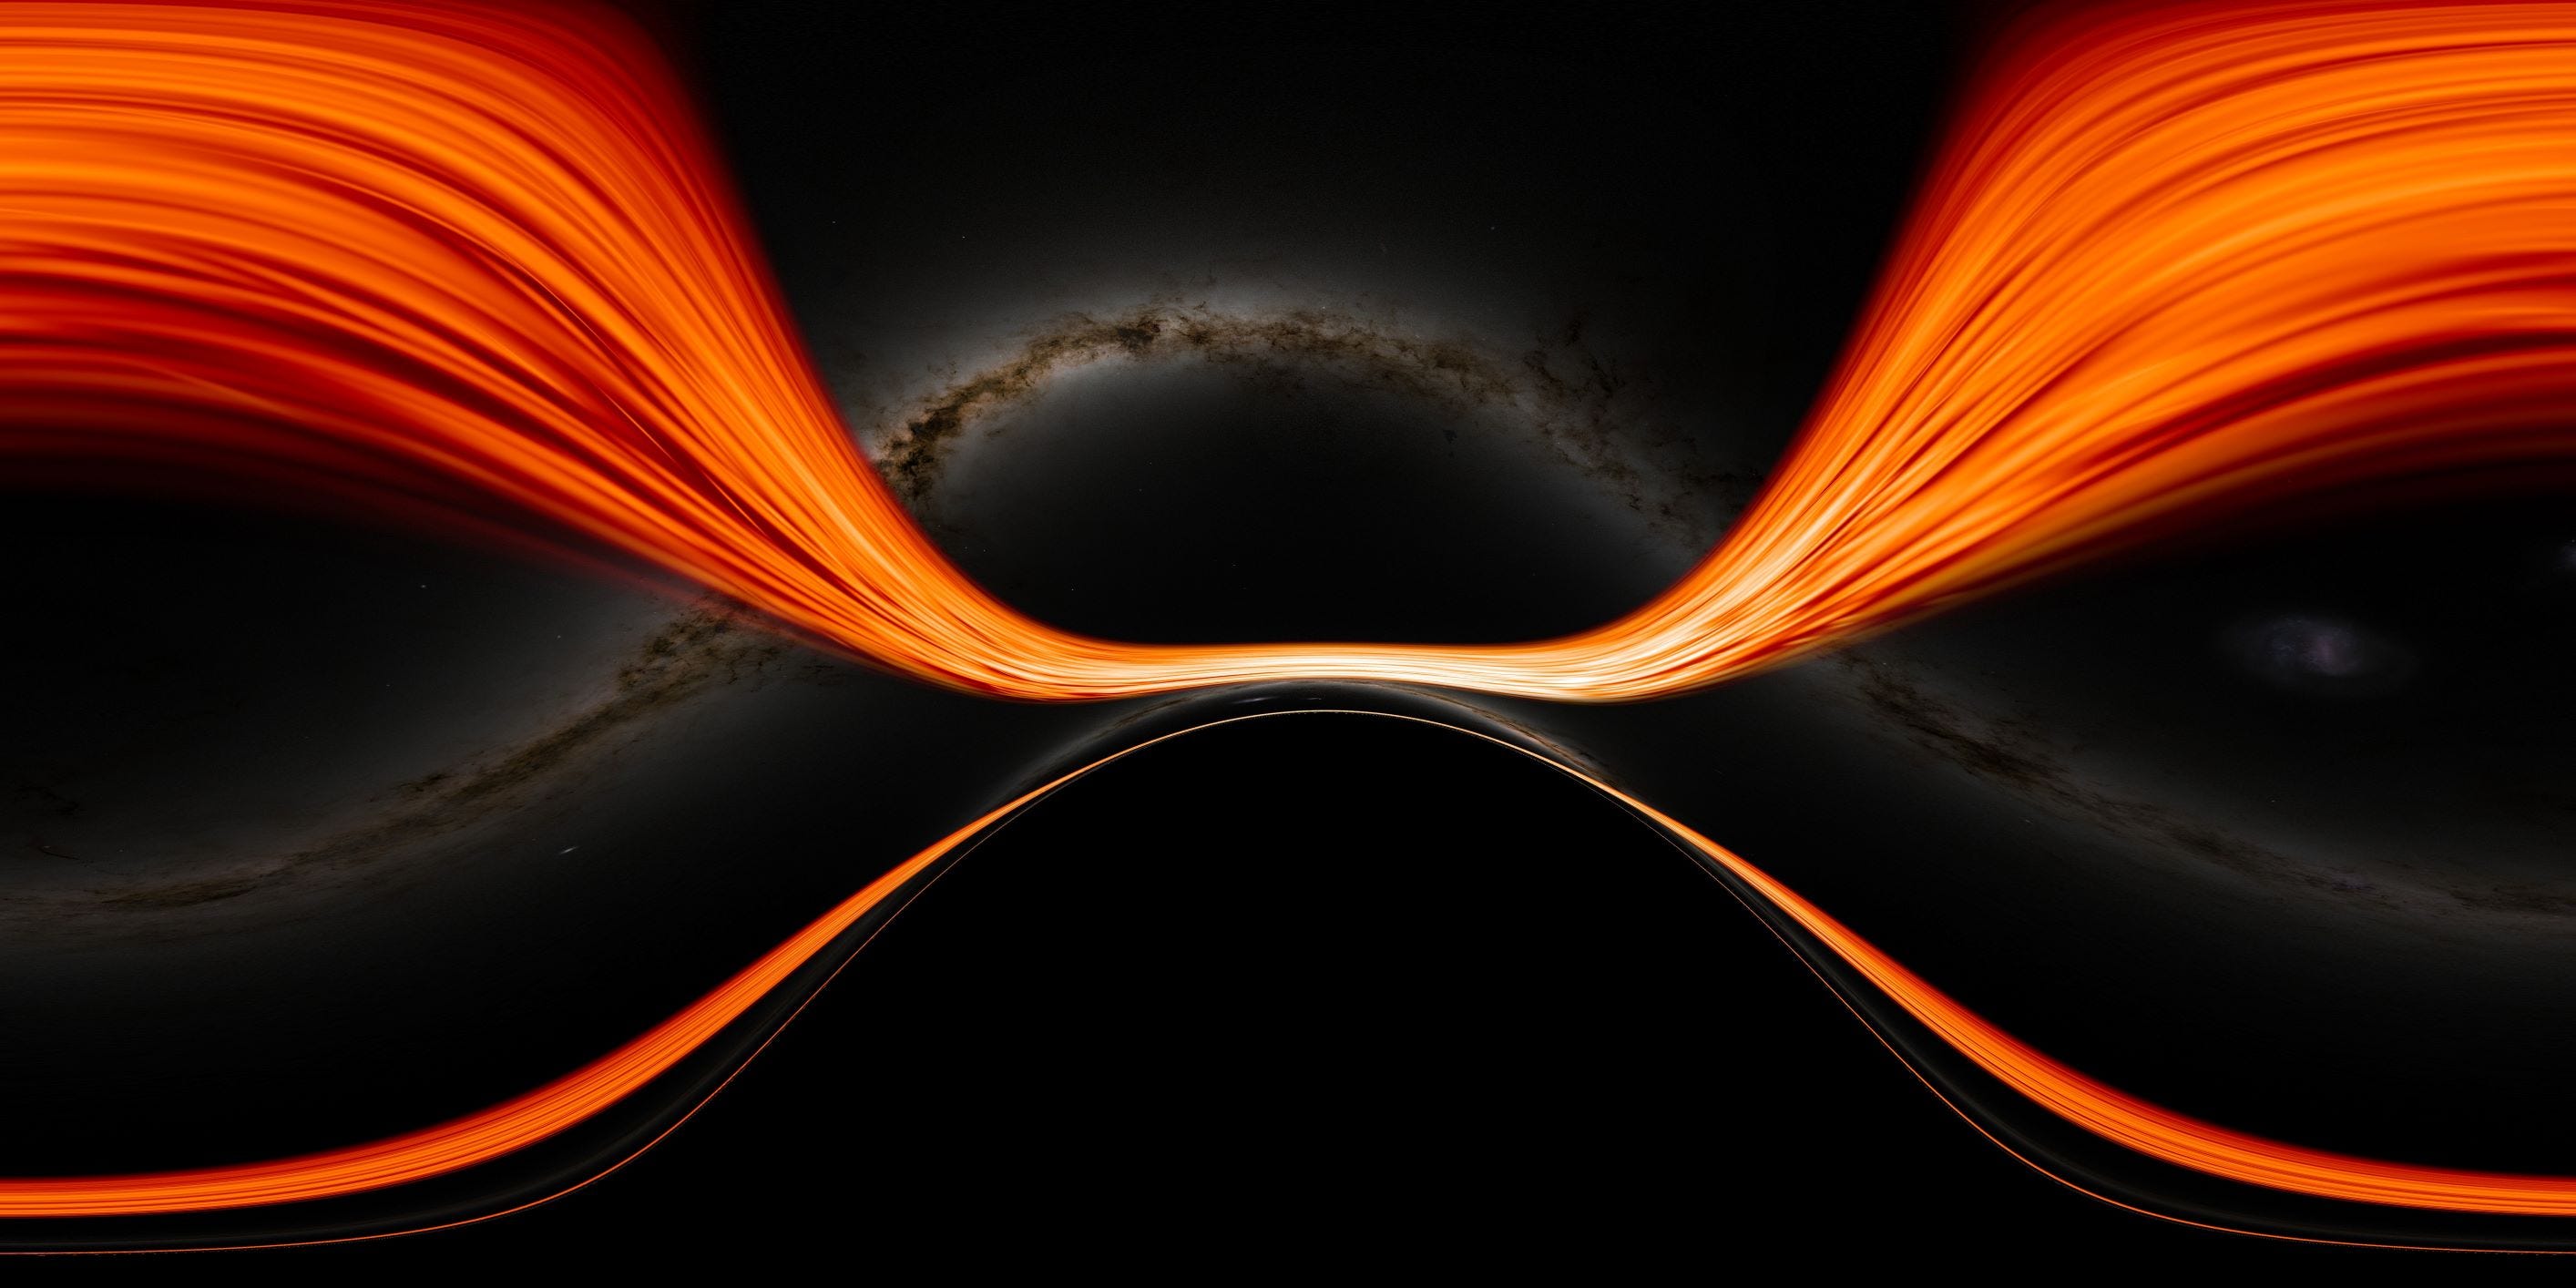 what happens if you fall into a black hole? nasa simulations provide an answer.